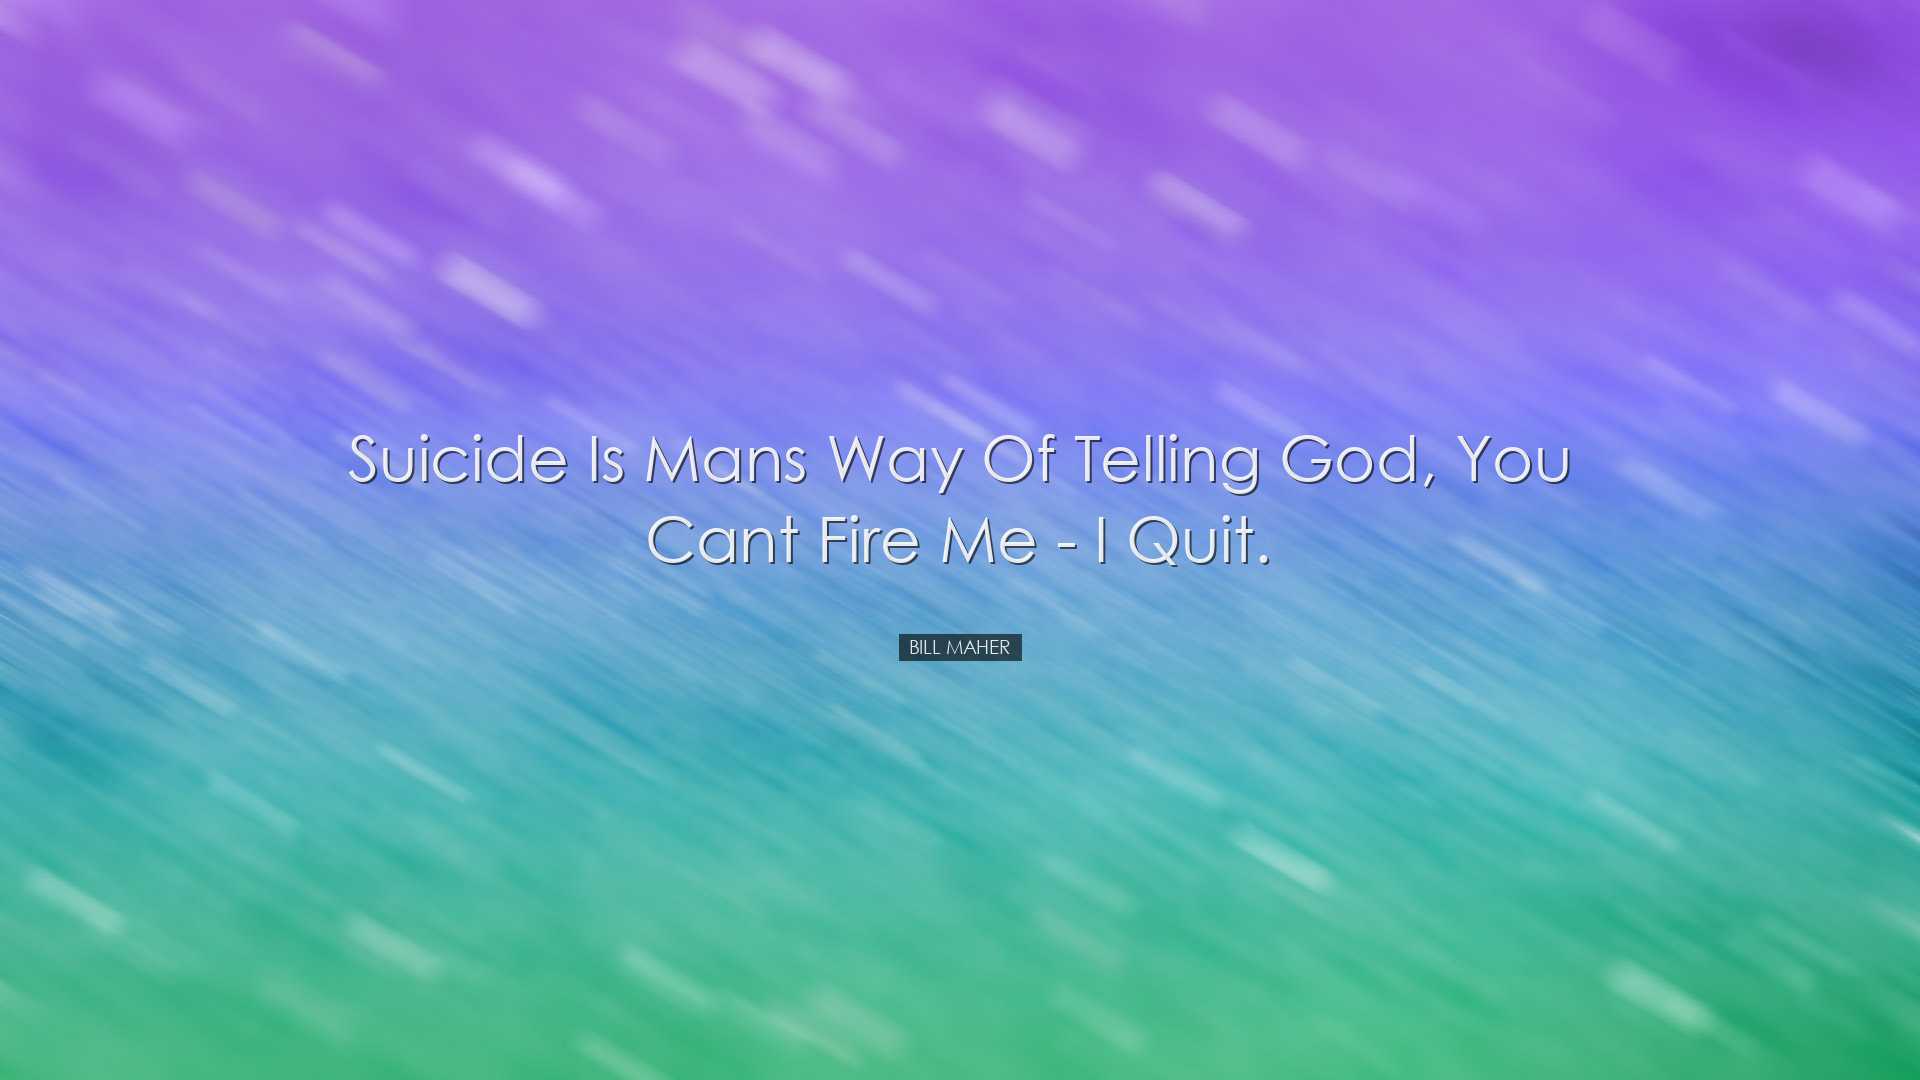 Suicide is mans way of telling God, You cant fire me - I quit. - B